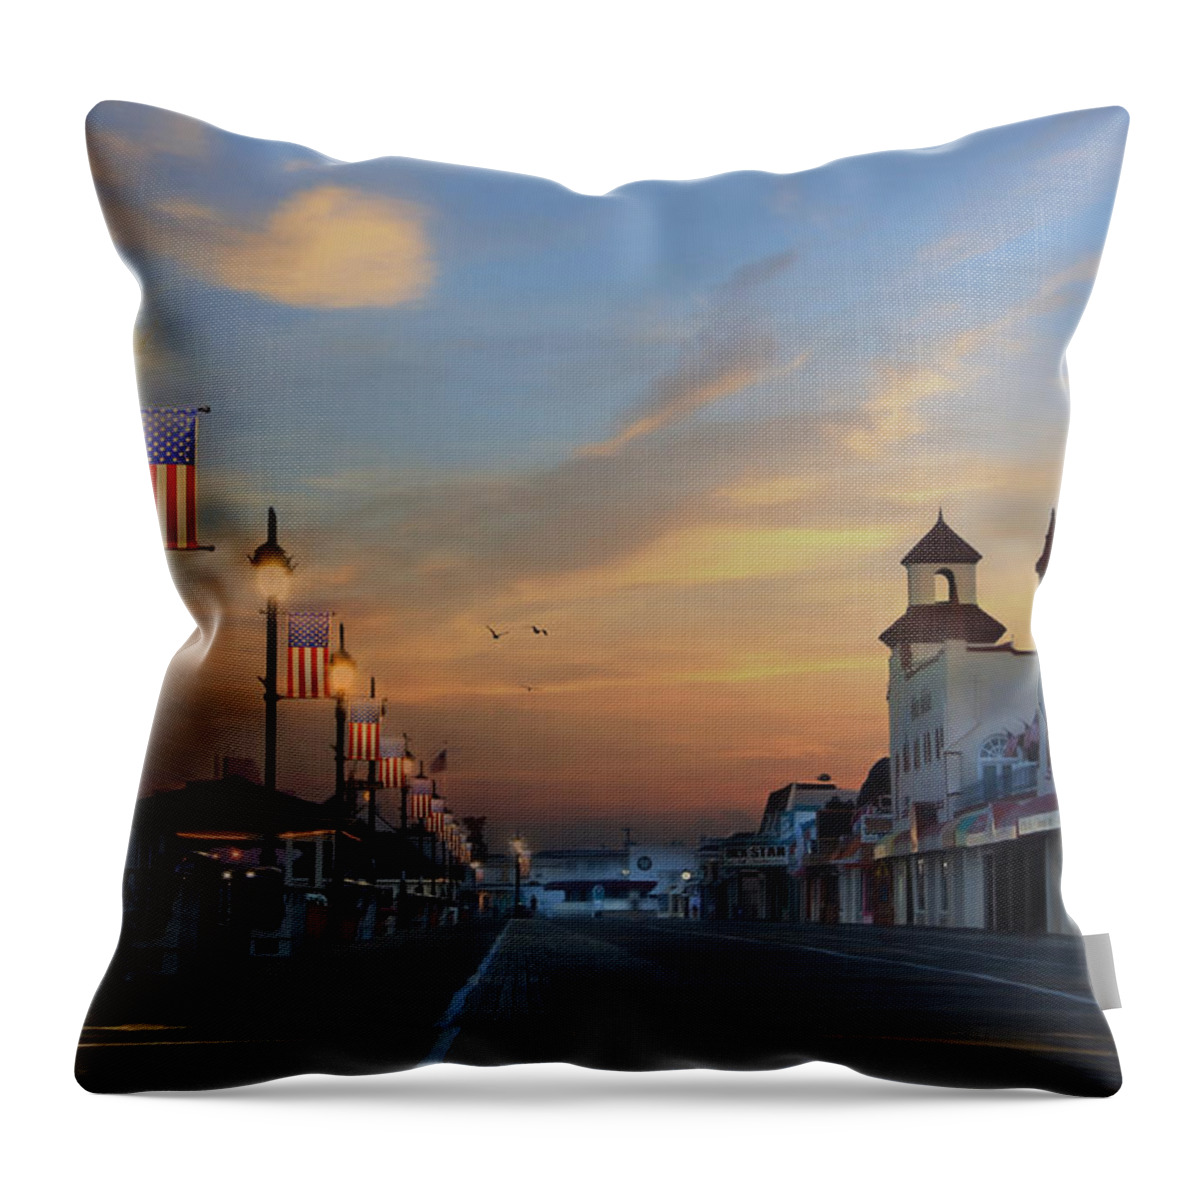 Boardwalk Throw Pillow featuring the photograph America's Family Boardwalk by Lori Deiter